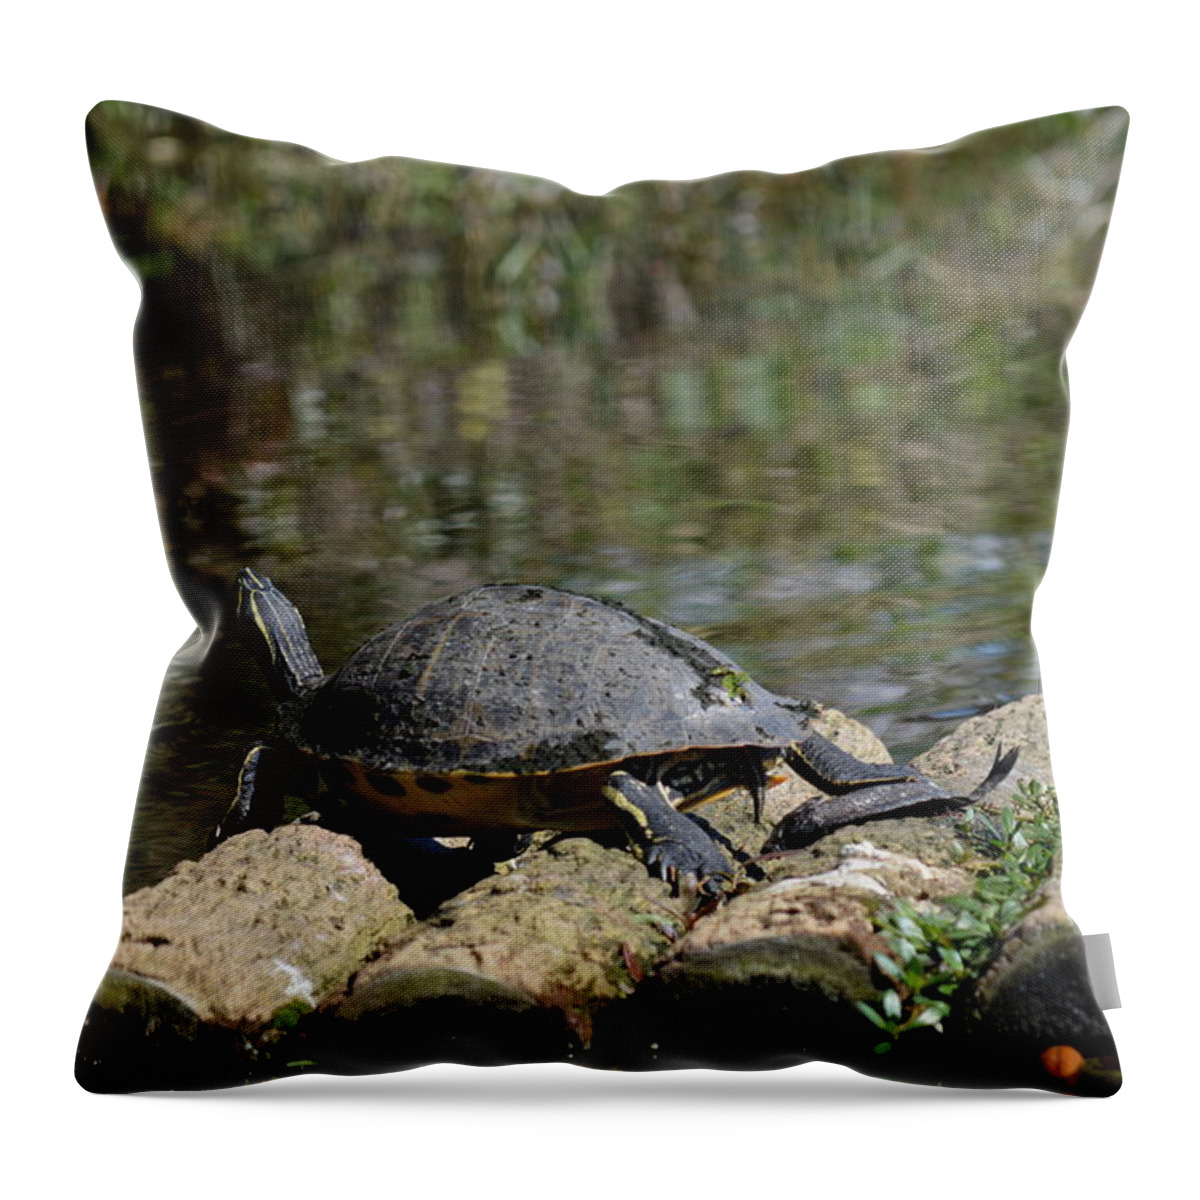 Turtle Throw Pillow featuring the photograph Turtle on a Raft by Linda Kerkau